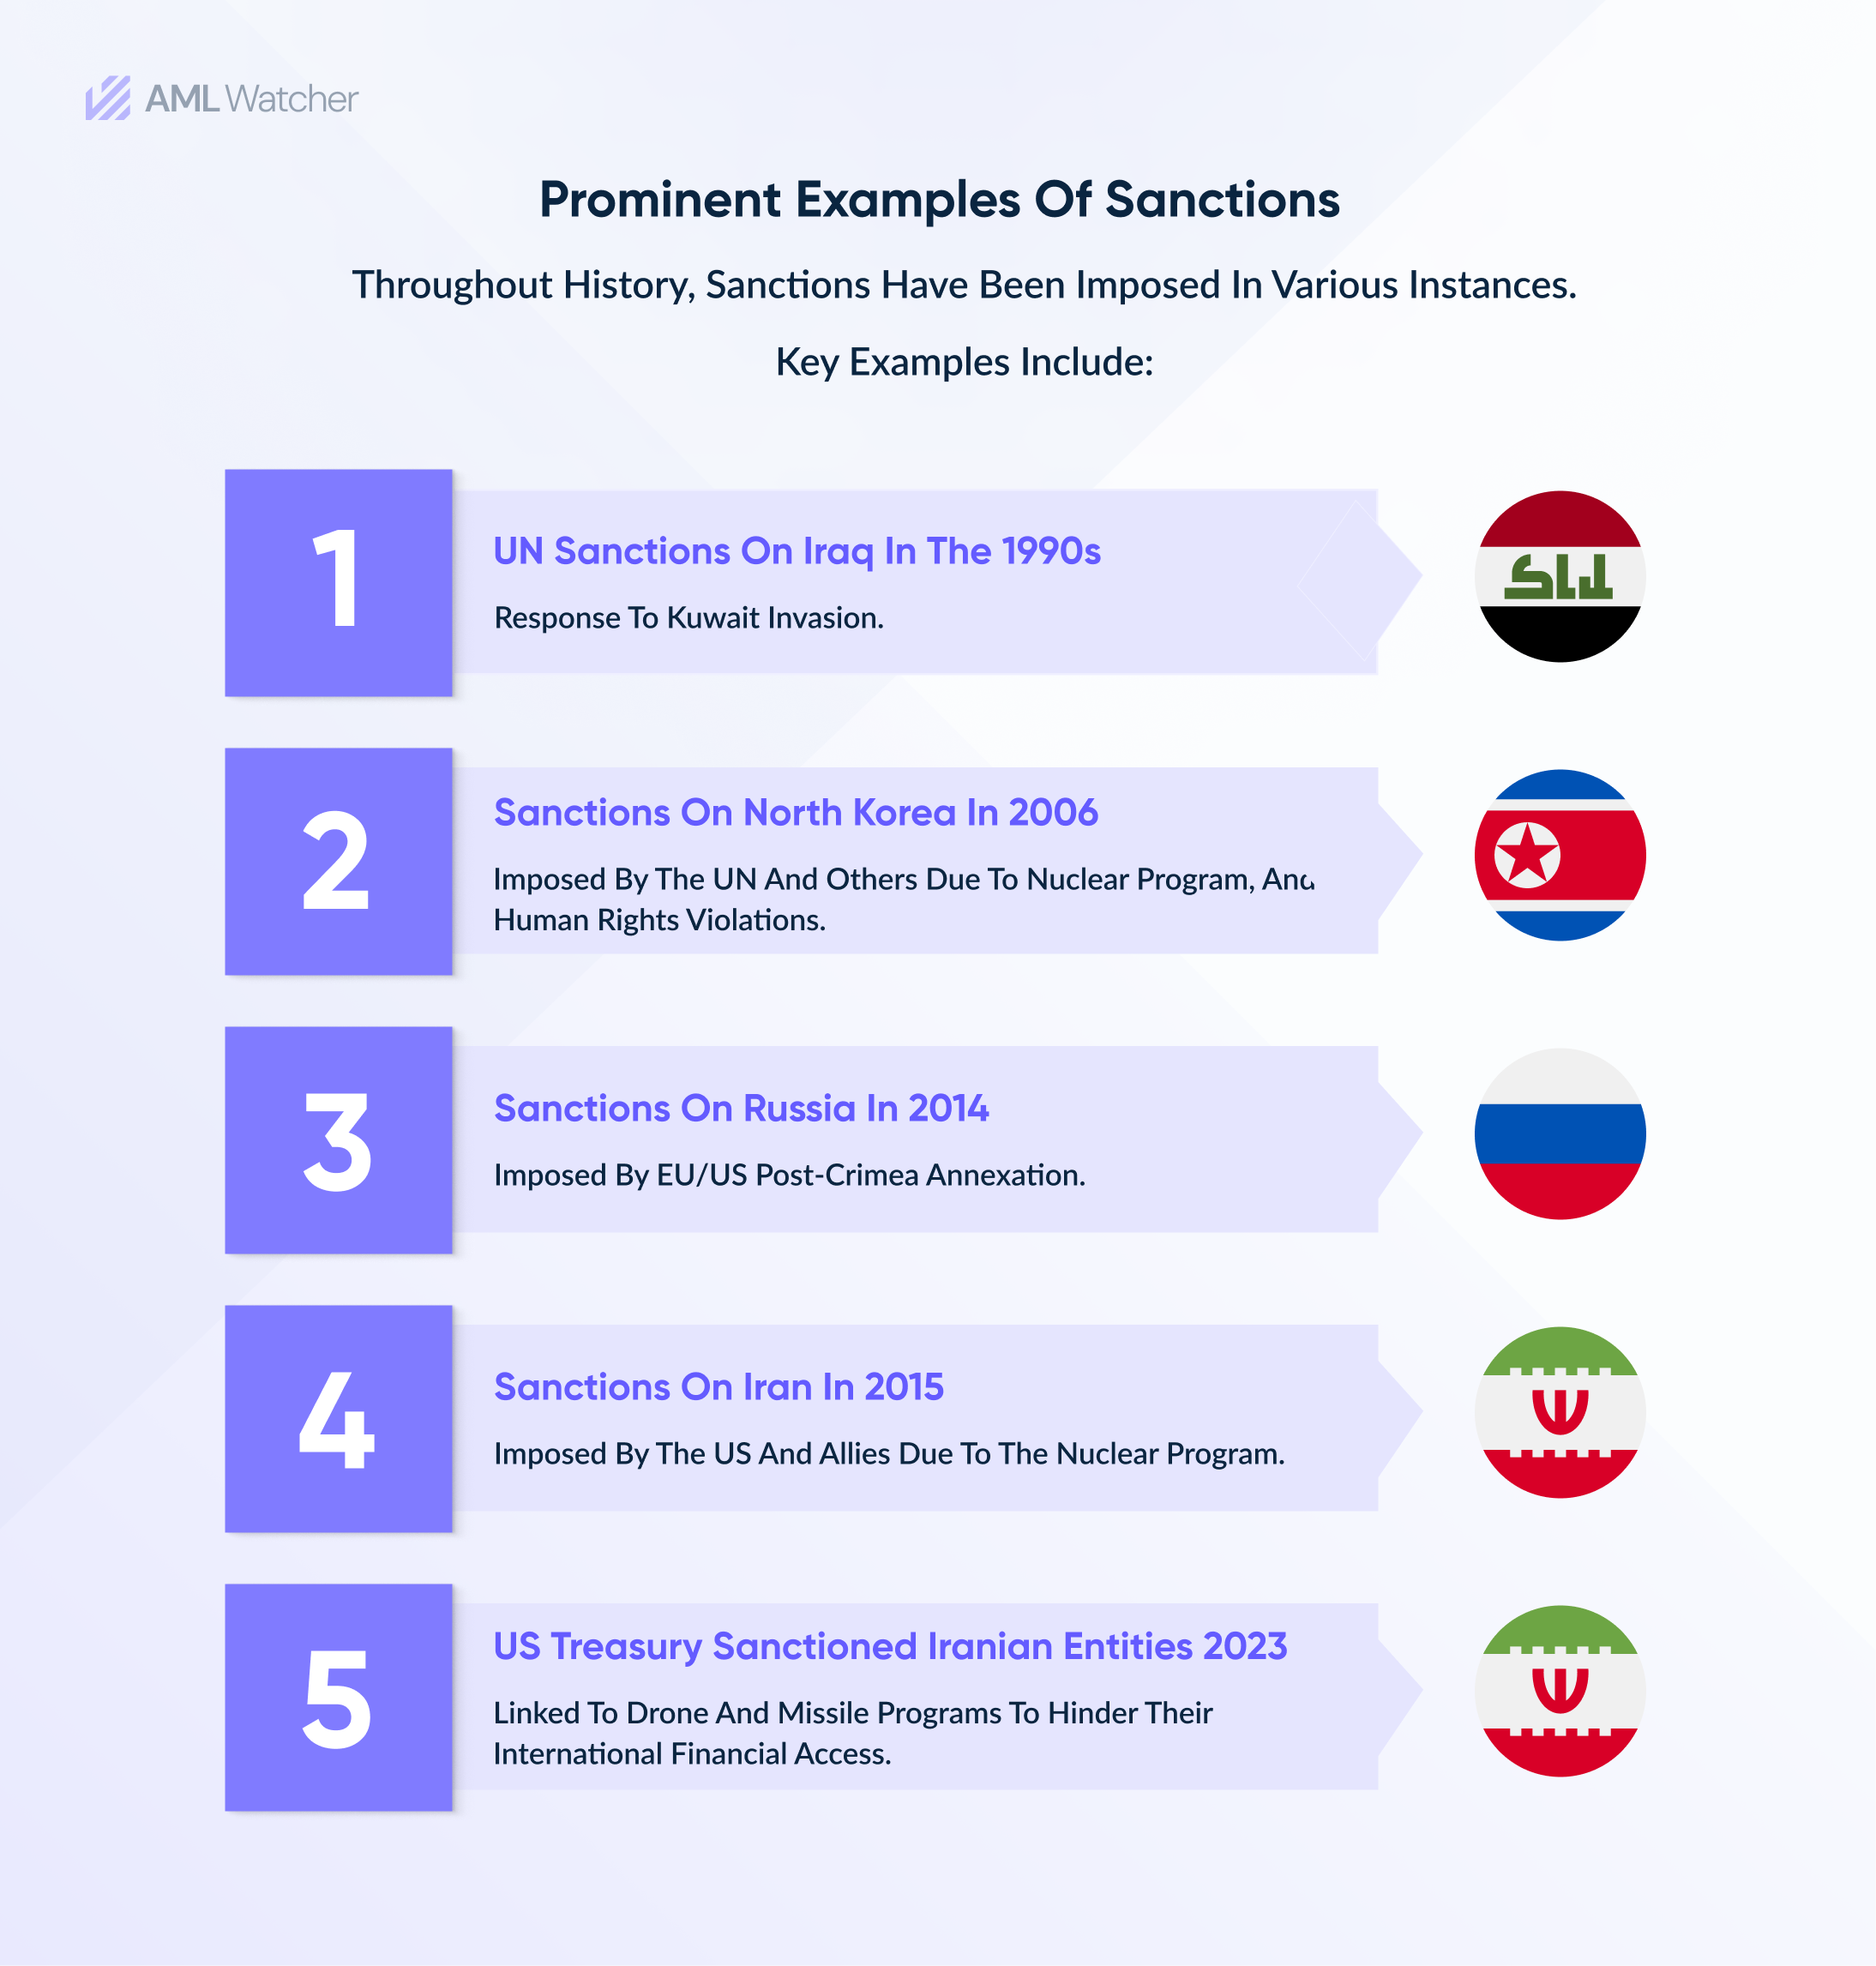 The image shows the latest examples of imposed international sanctions.